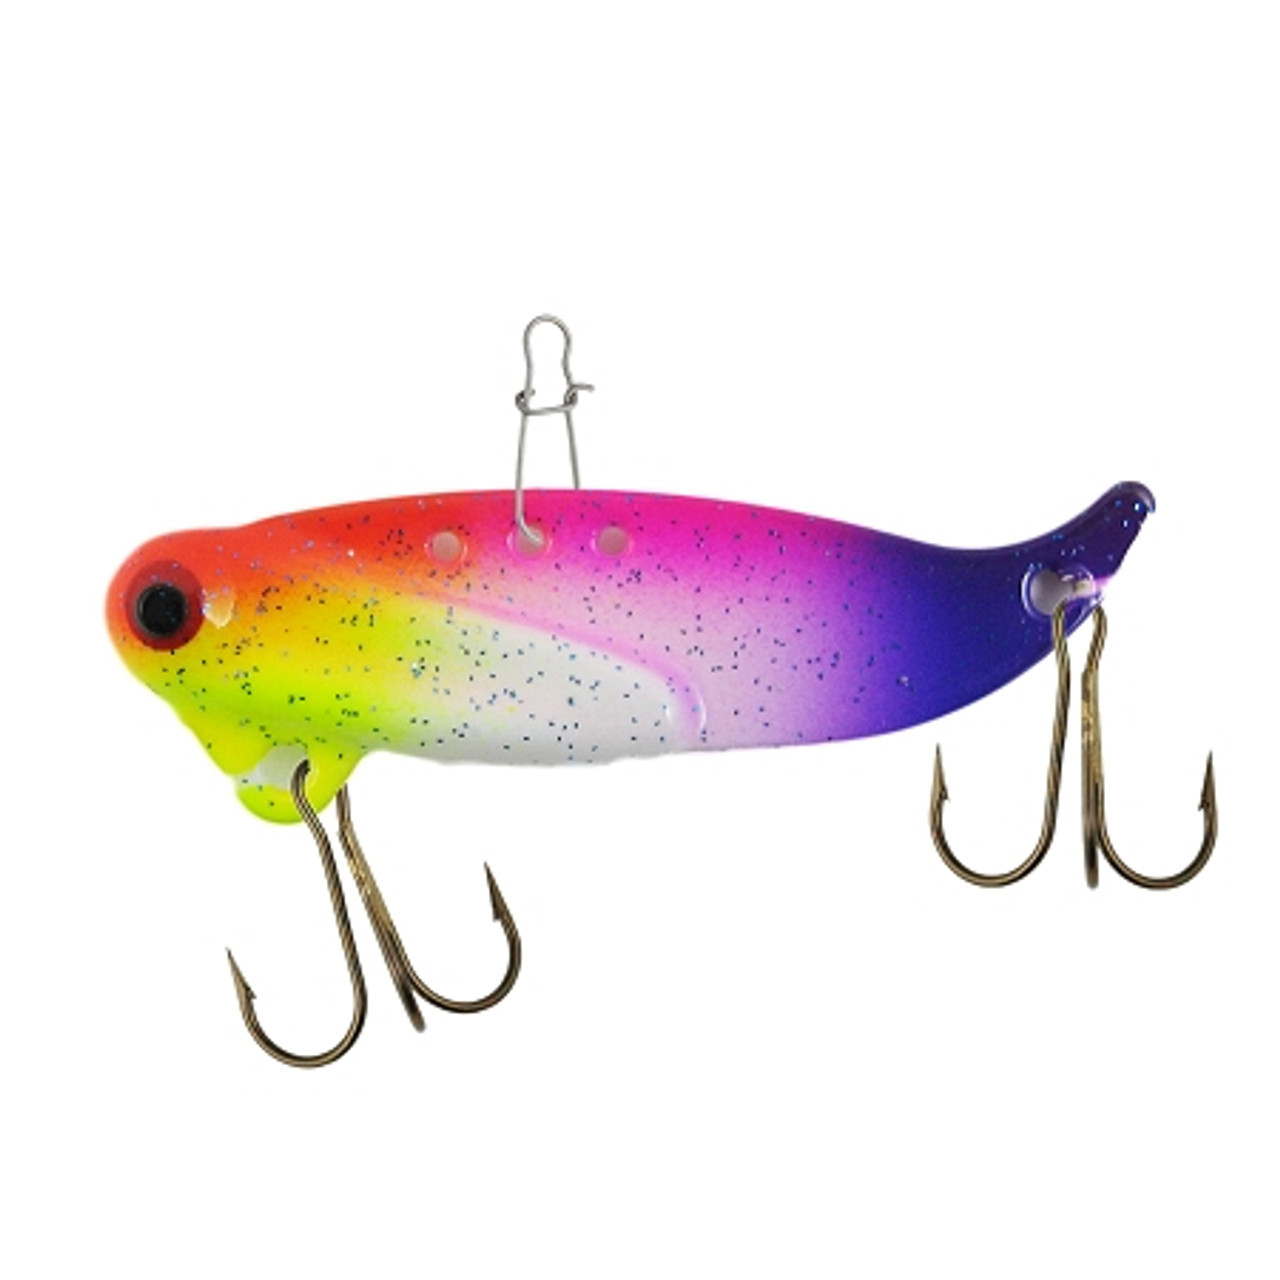 Bait, Spinner Fishing Kit, Lures For Pike, Walleye, Glitter Soft Bait  (supplied With Pliers)